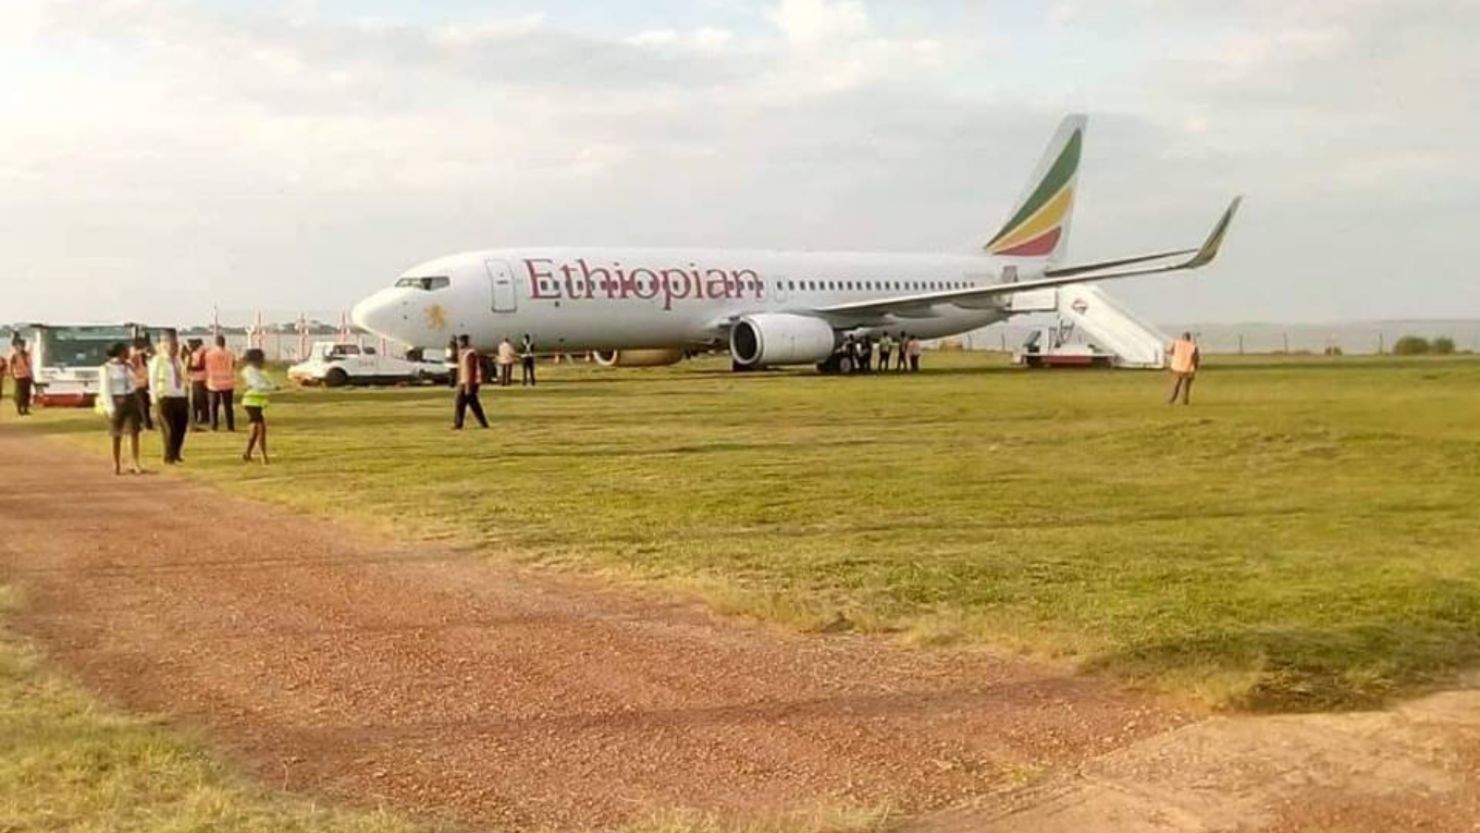 An Ethiopian Airlines plane skidded off the runway at Entebbe International Airport in Uganda on January 3, 2019.